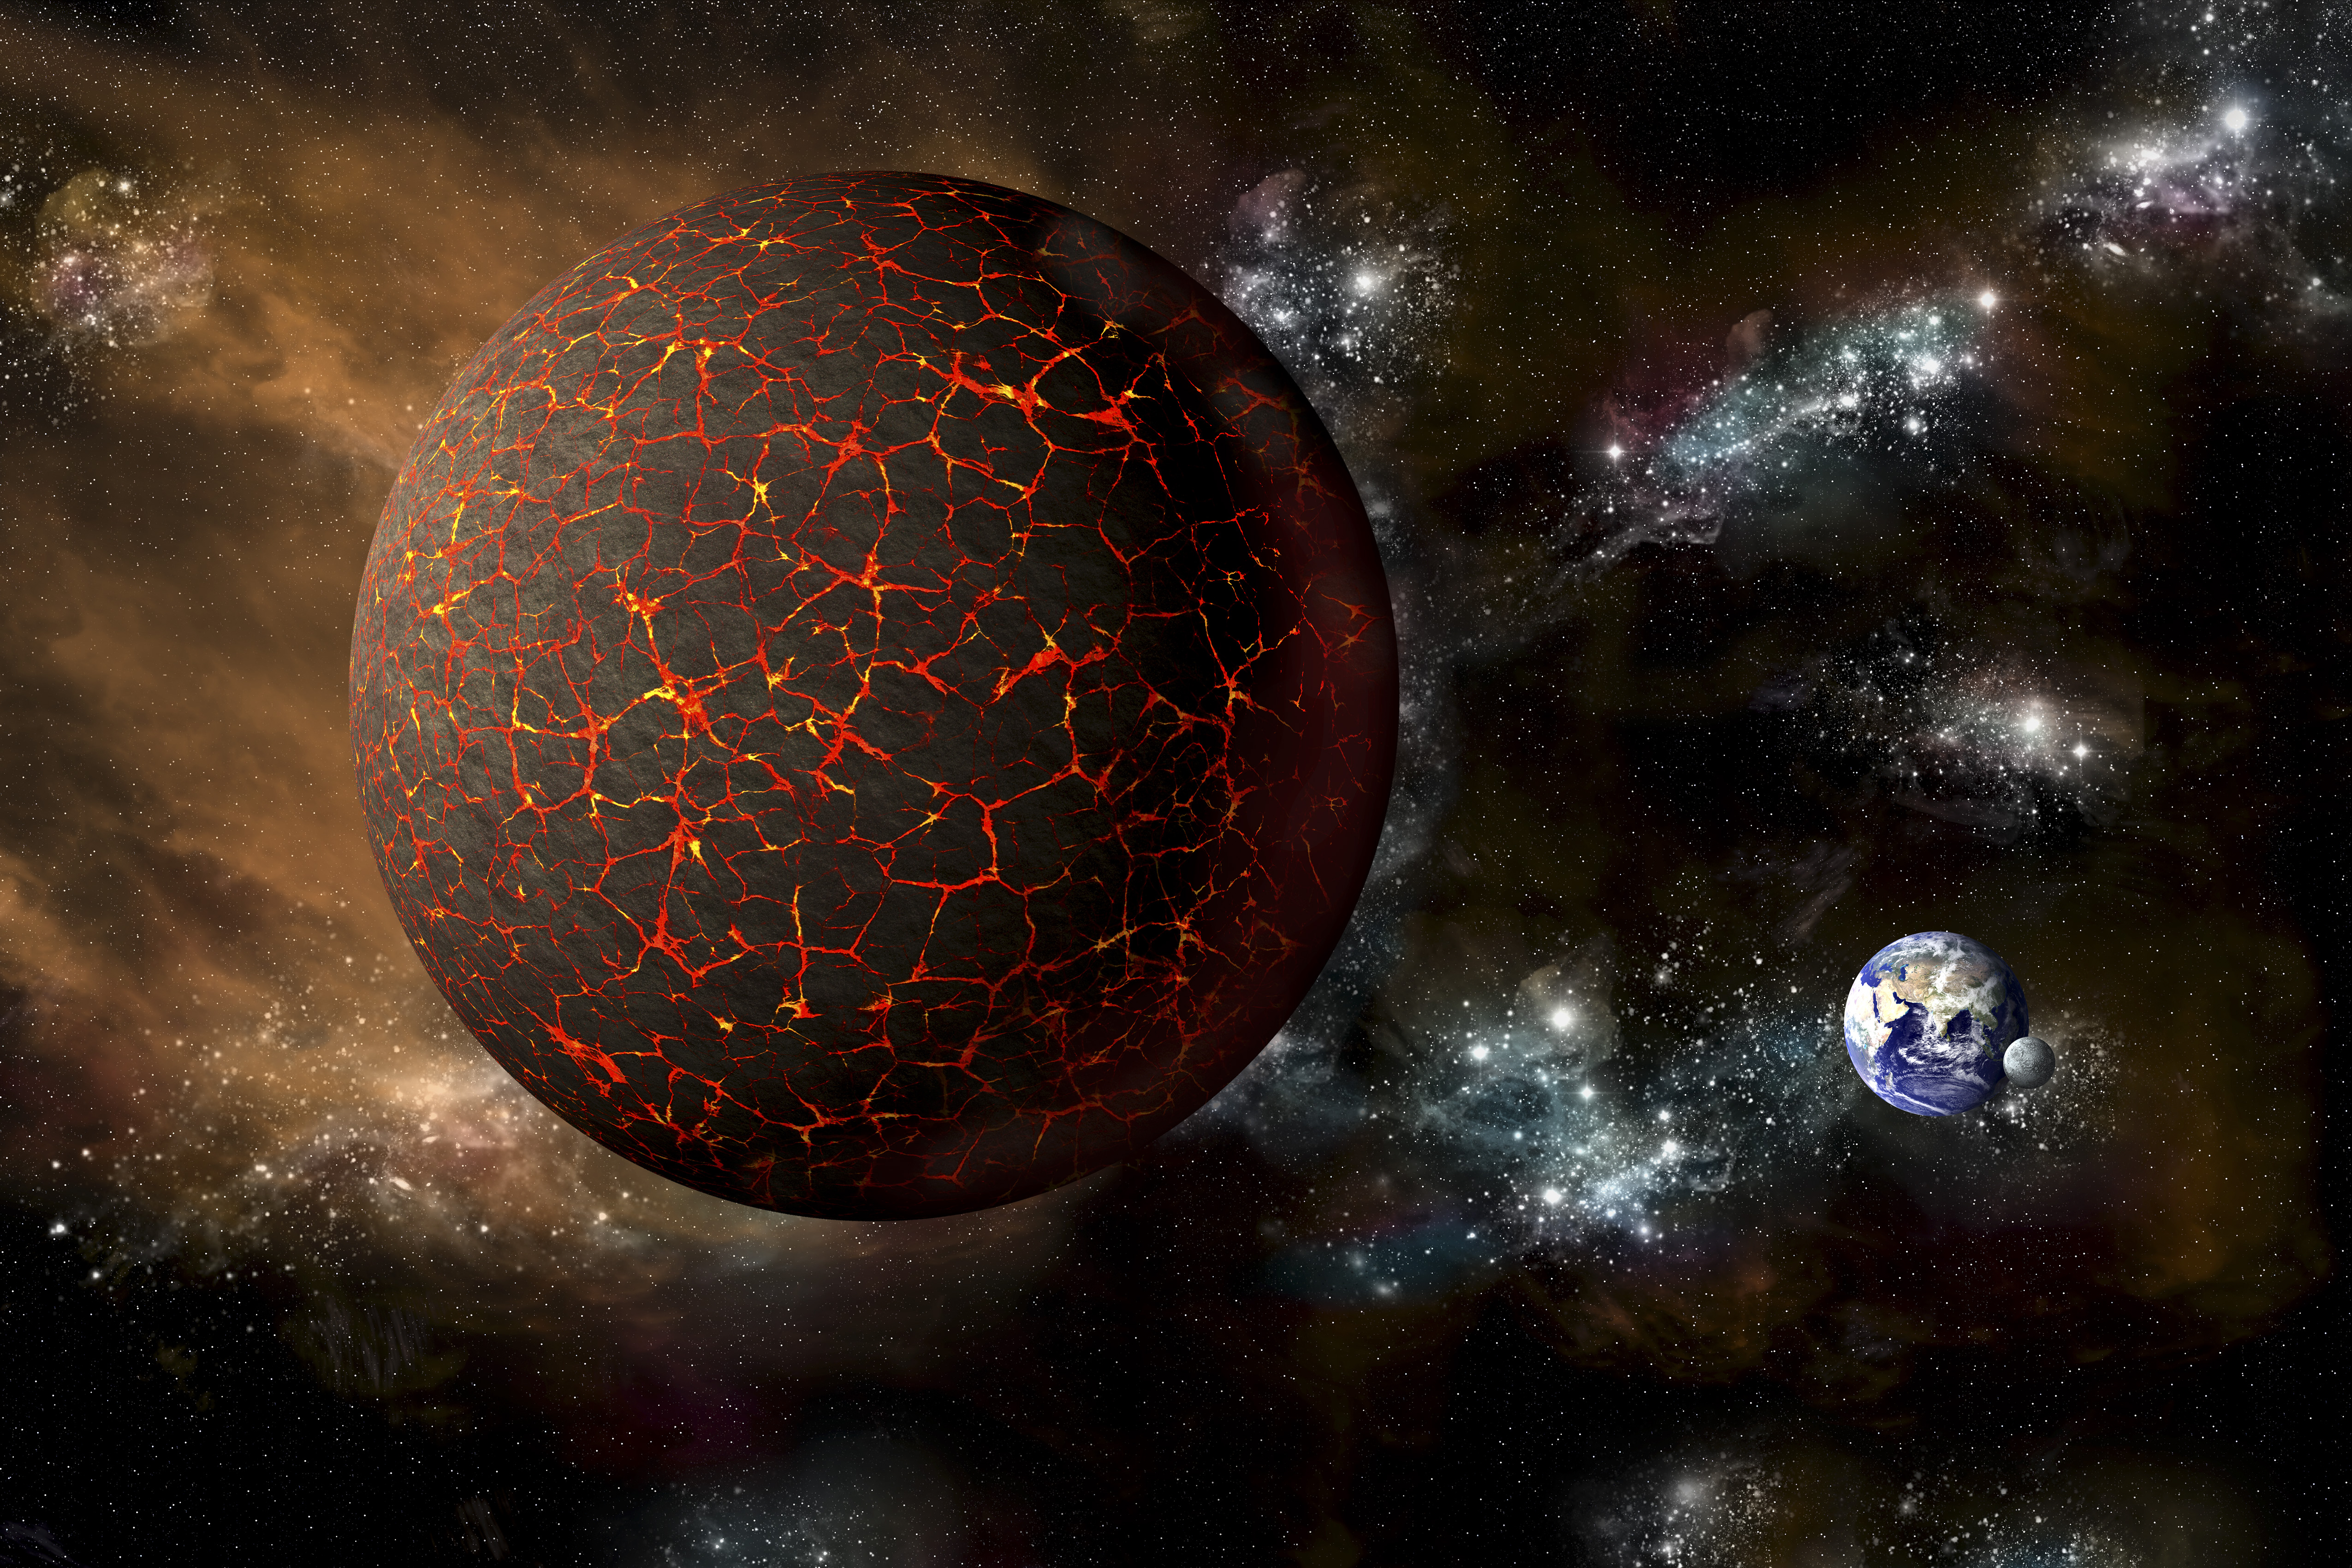 Planet X' will destroy the Earth on April 23, according to